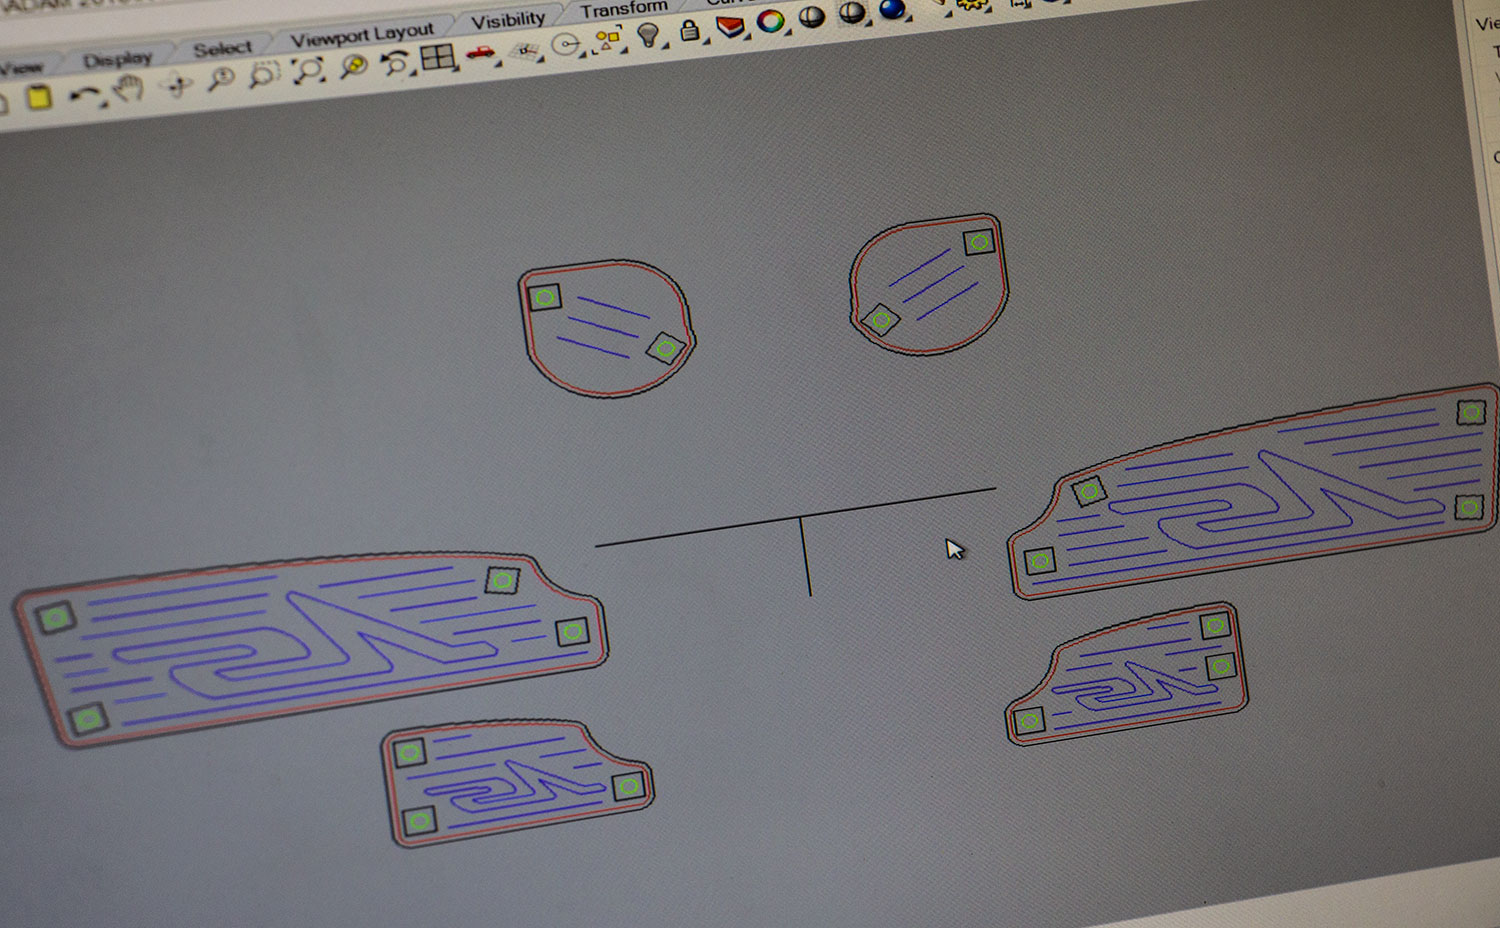 Designs for yacht drain grates.